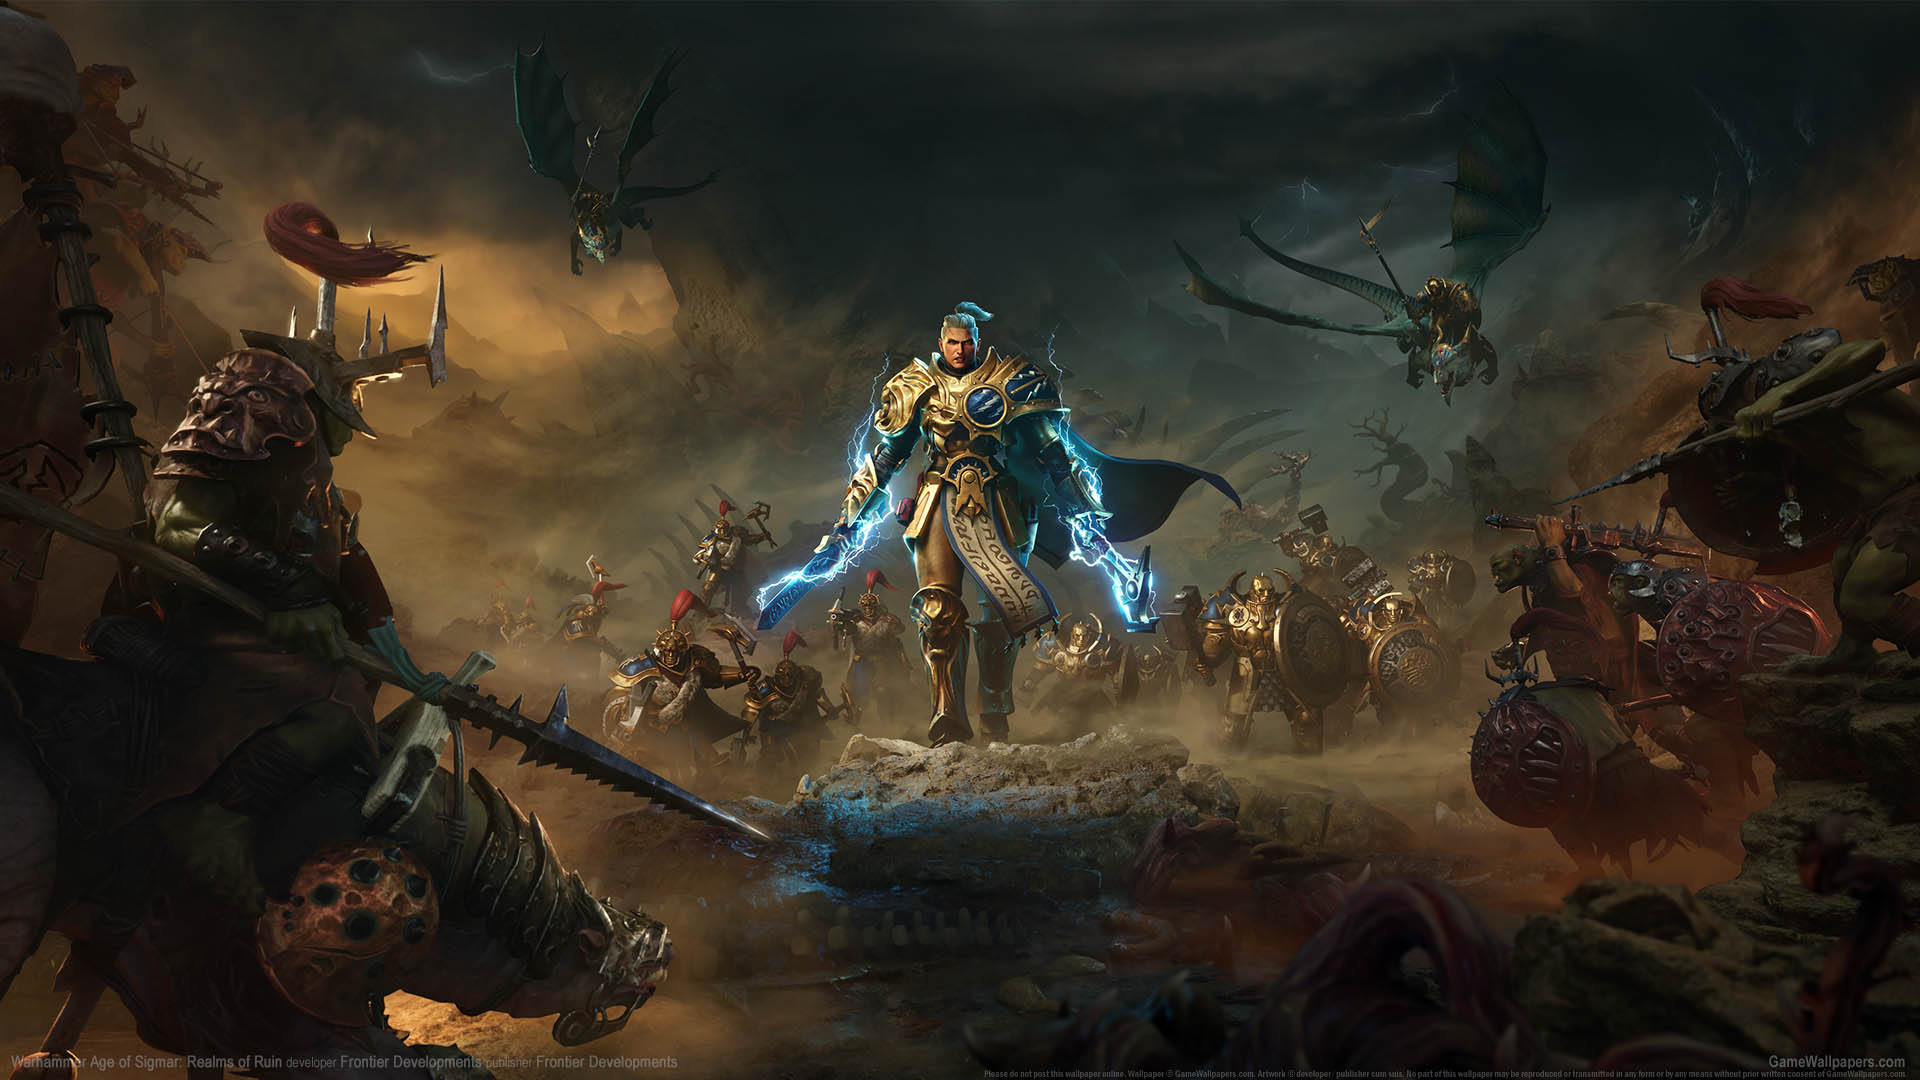 Warhammer Age of Sigmar: Realms of Ruin achtergrond 01 1920x1080